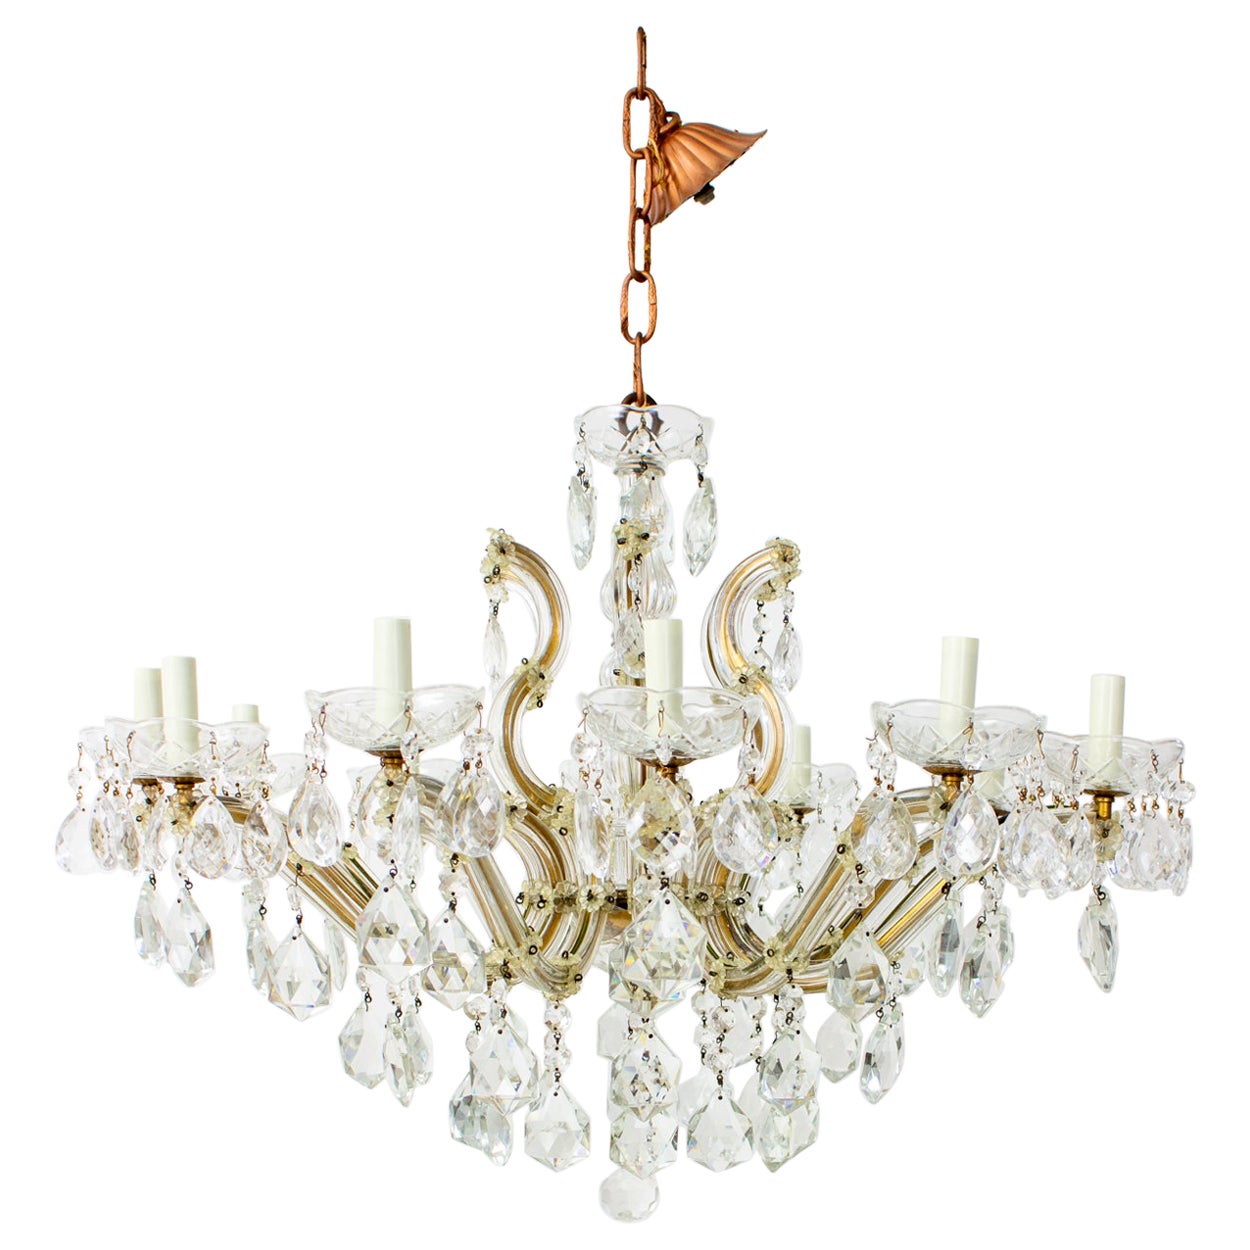 Mid 20th Century Crystal Maria Theresa Chandelier For Sale